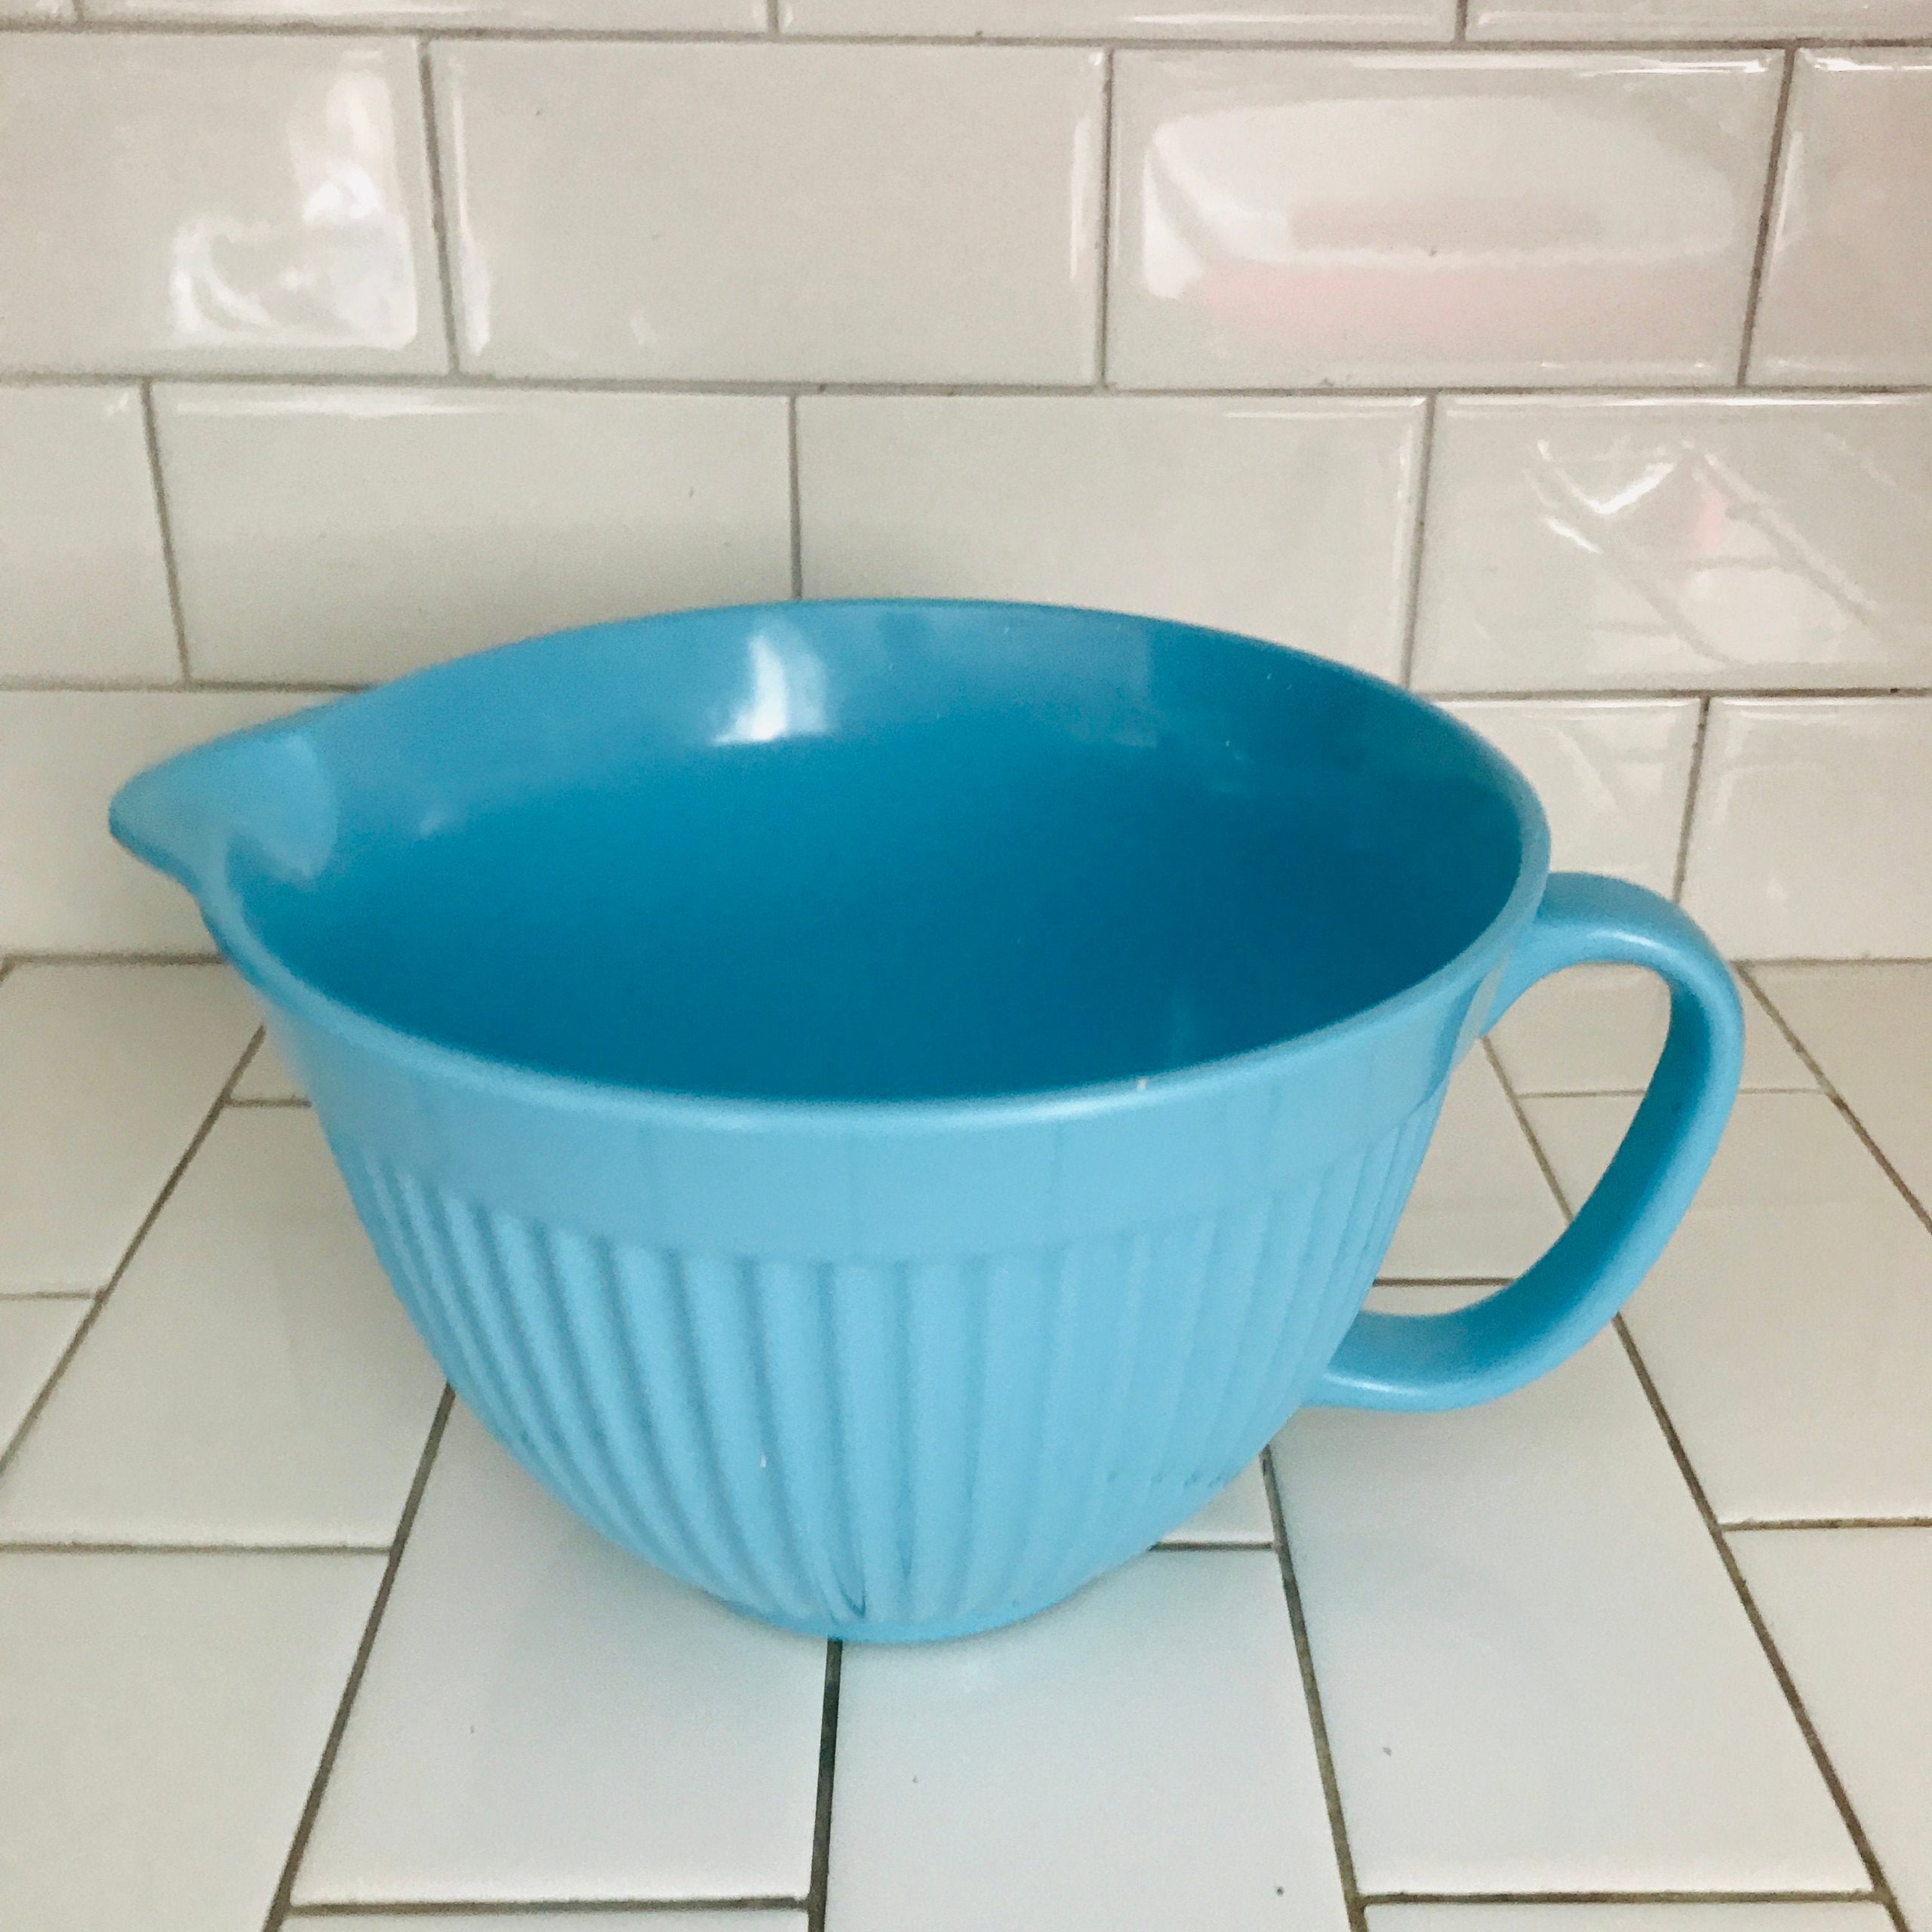 https://www.truevintageantiques.com/wp-content/uploads/2020/07/vintage-melamine-bowl-with-pour-spout-mixing-bowl-collectible-display-kitchen-decor-non-slip-base-ribbed-with-handle-5f1cb6d01-scaled.jpg